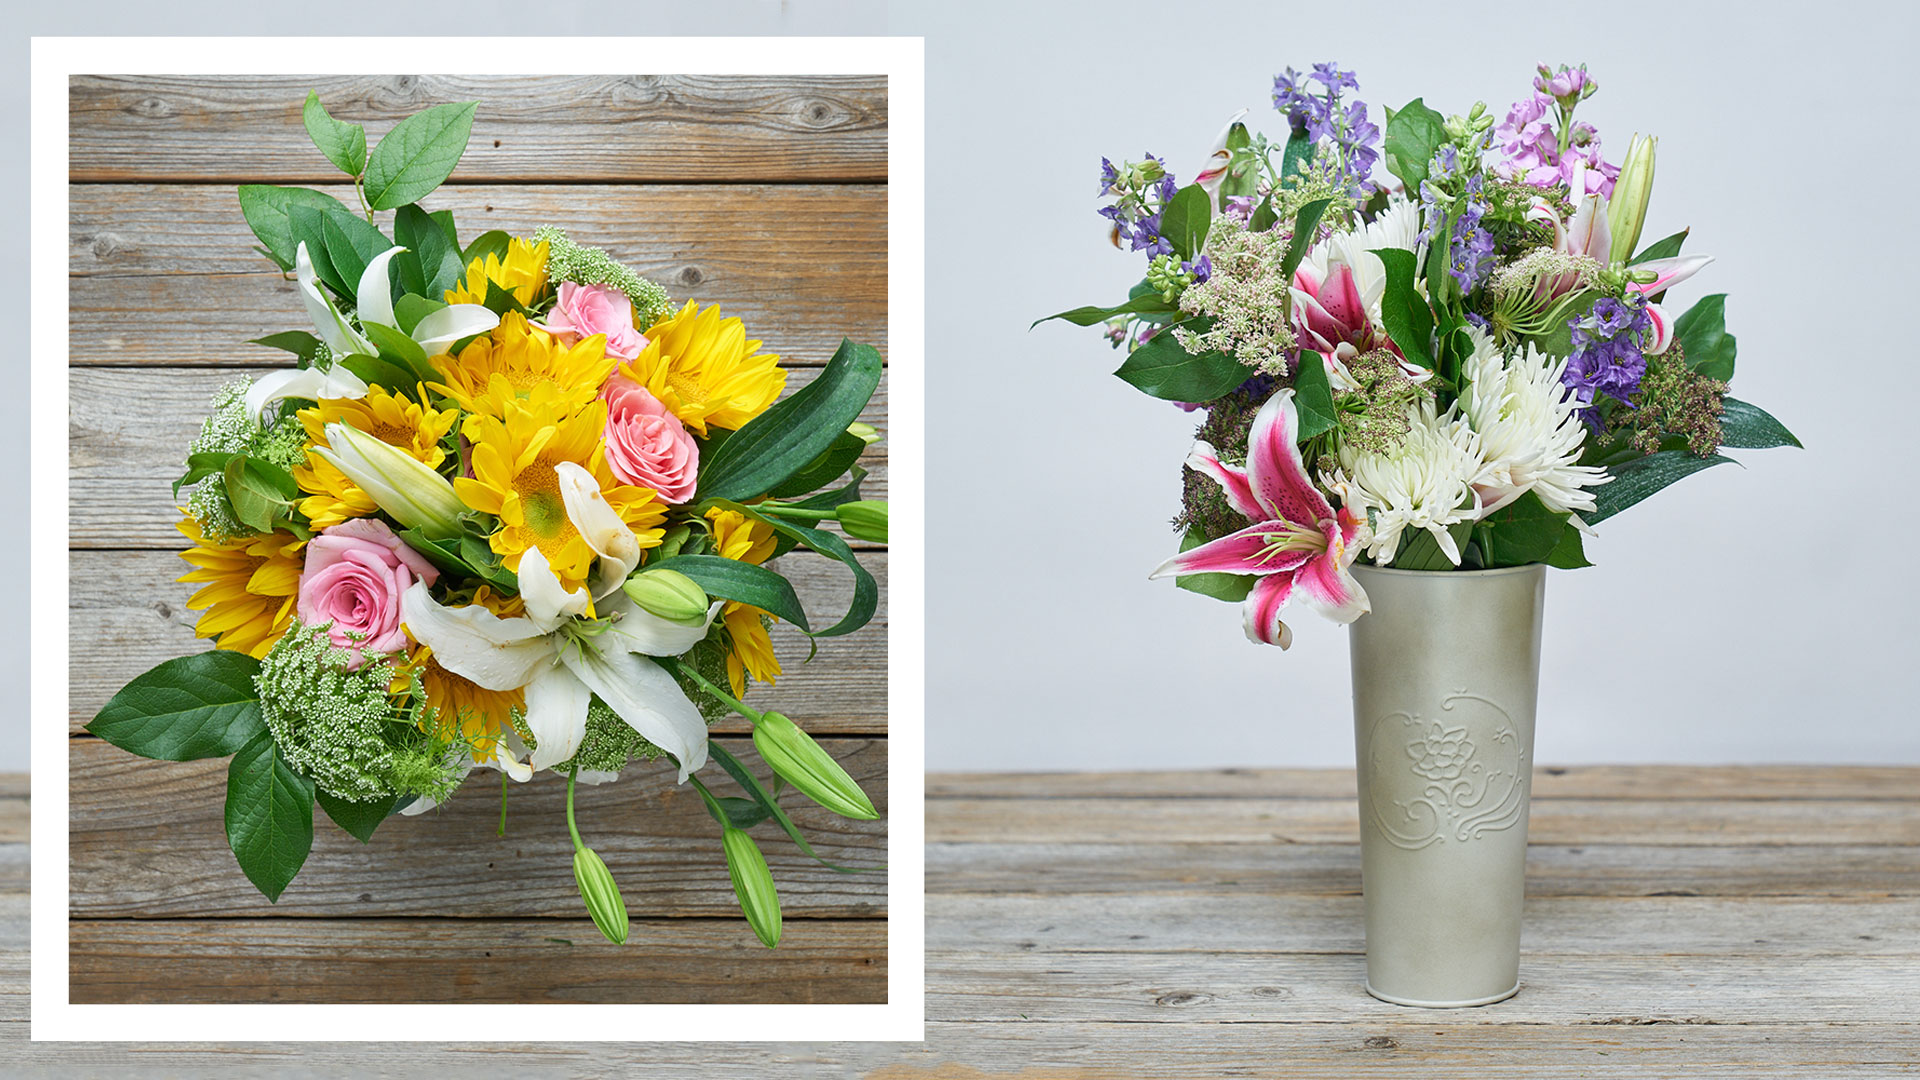 10 Best Flower Delivery Services That Ship Quickly   Decor Trends & Design  News   HGTV